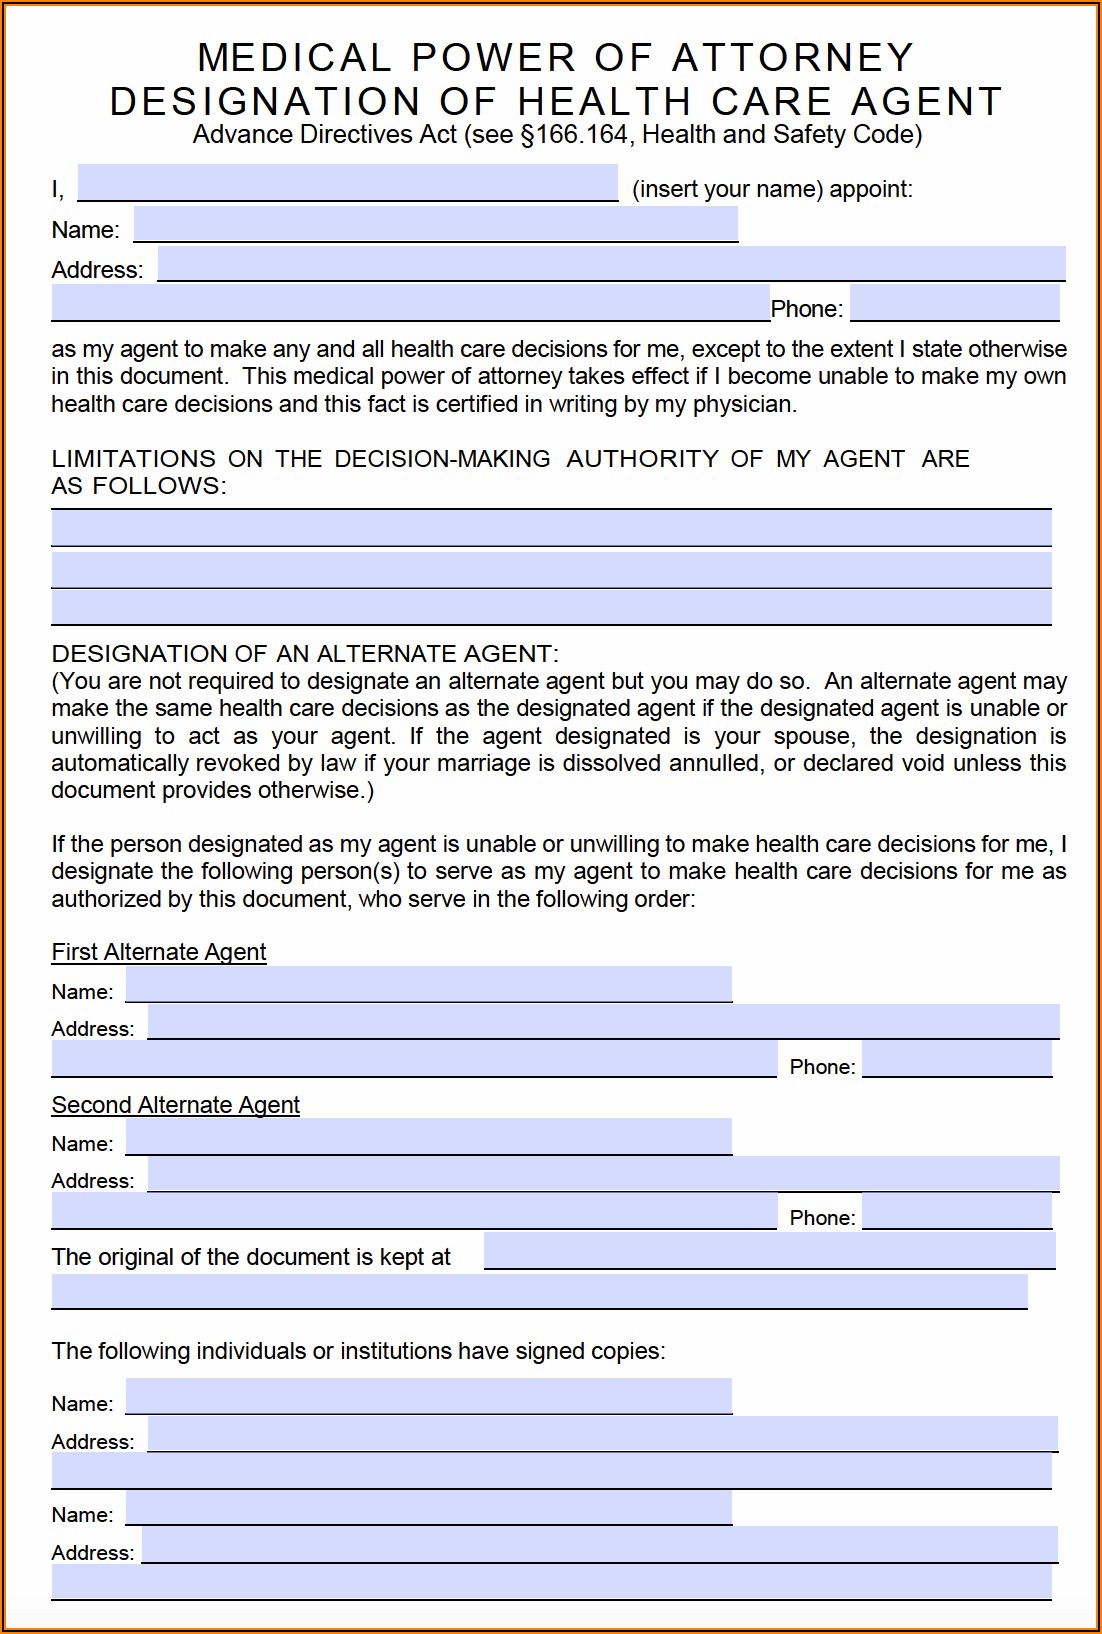 Maryland Medical Power Of Attorney Forms